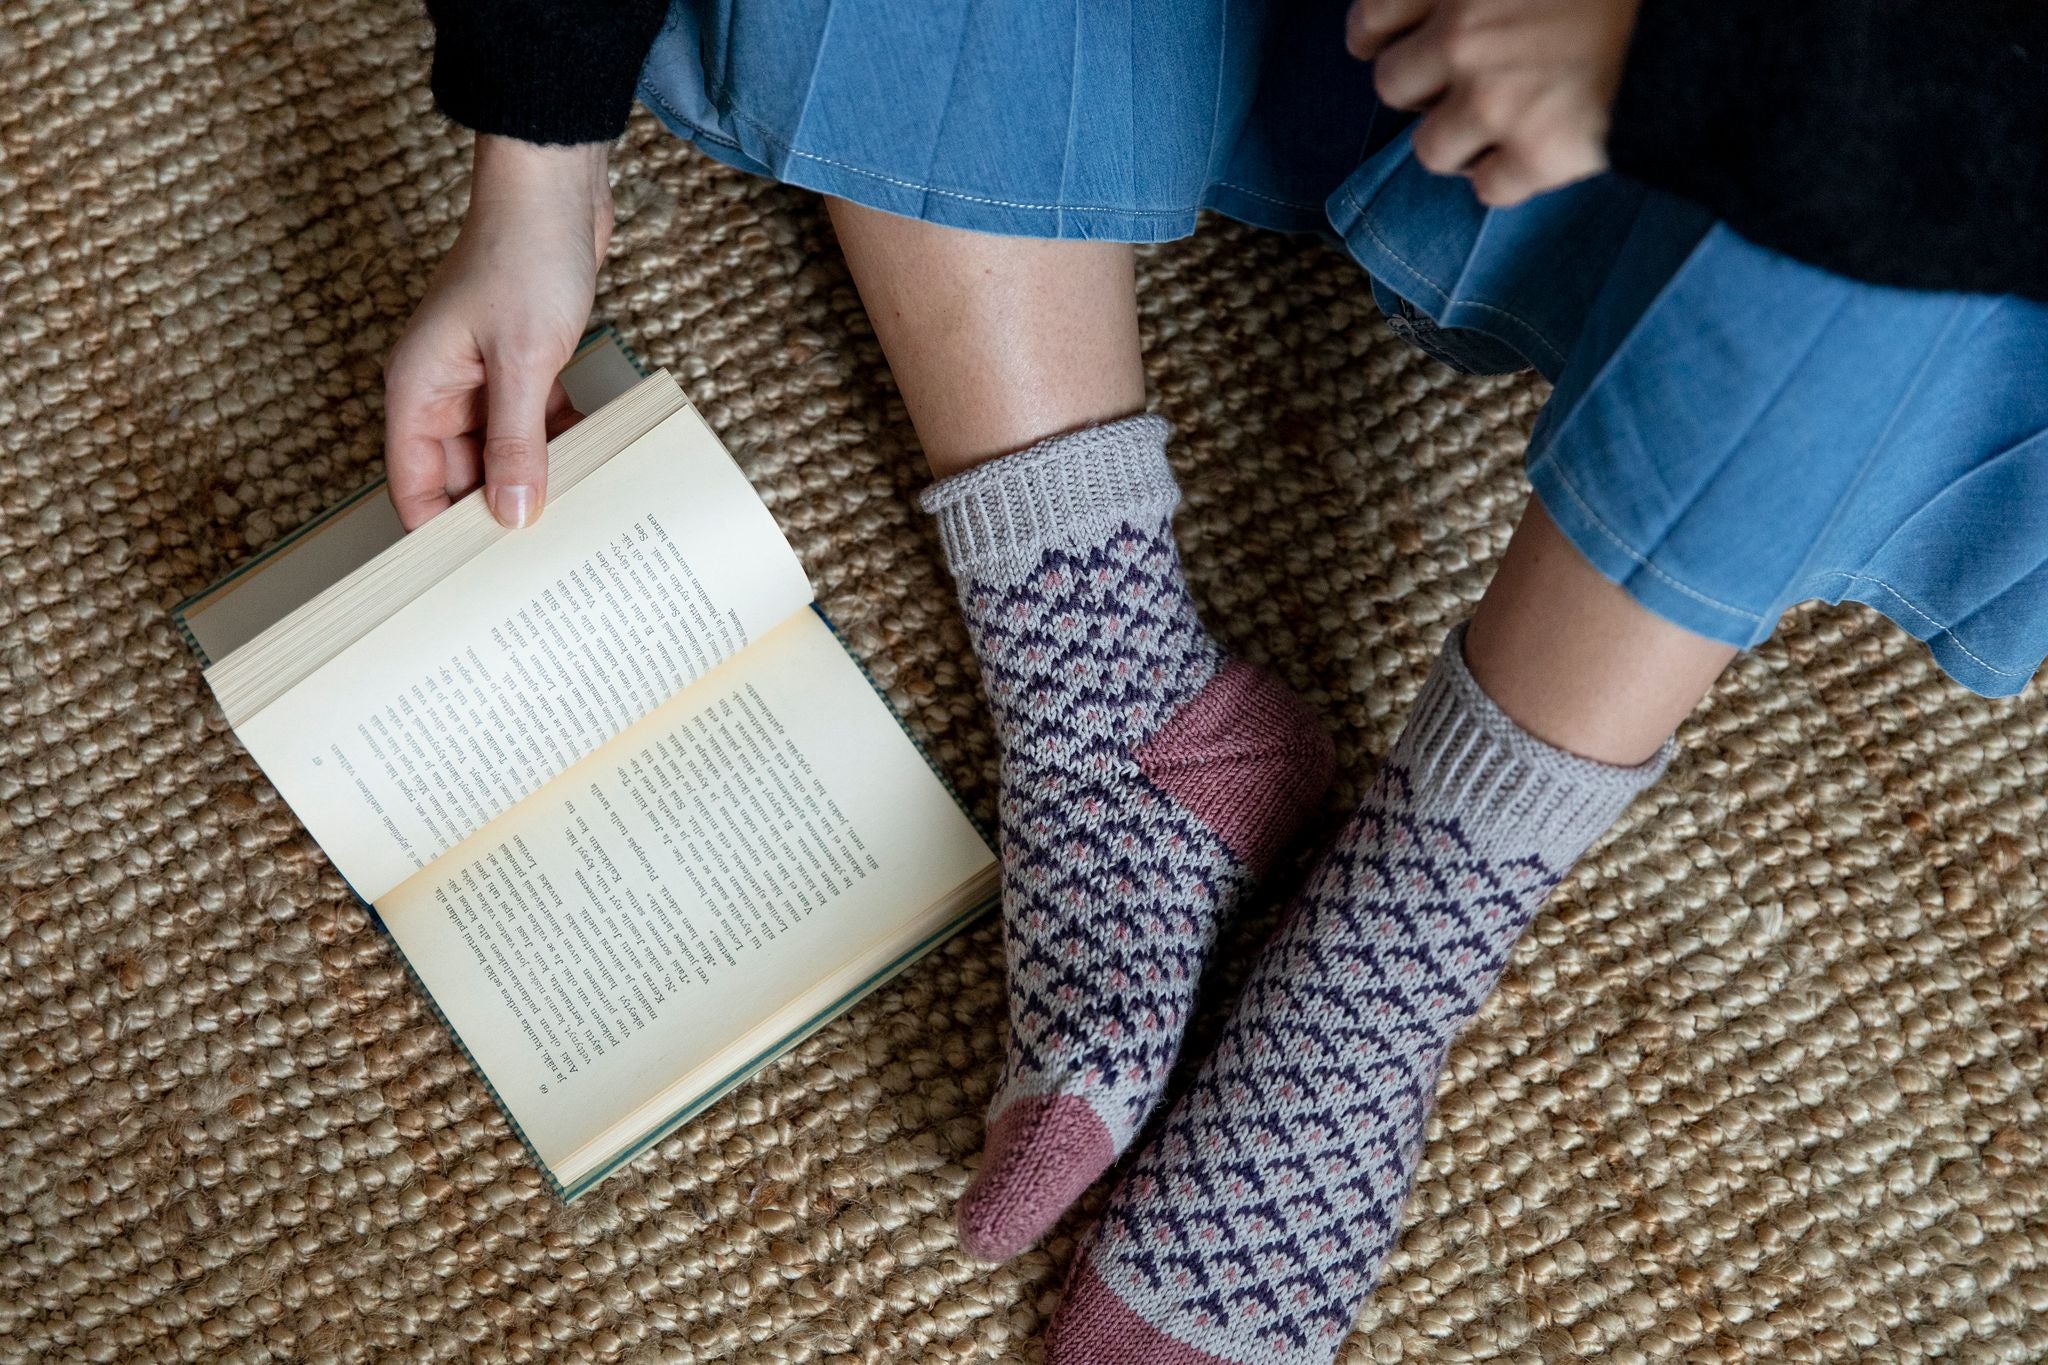 How to Knit Socks for Beginners: Super Easy and Modern Cozy Sock Patterns  (Paperback)